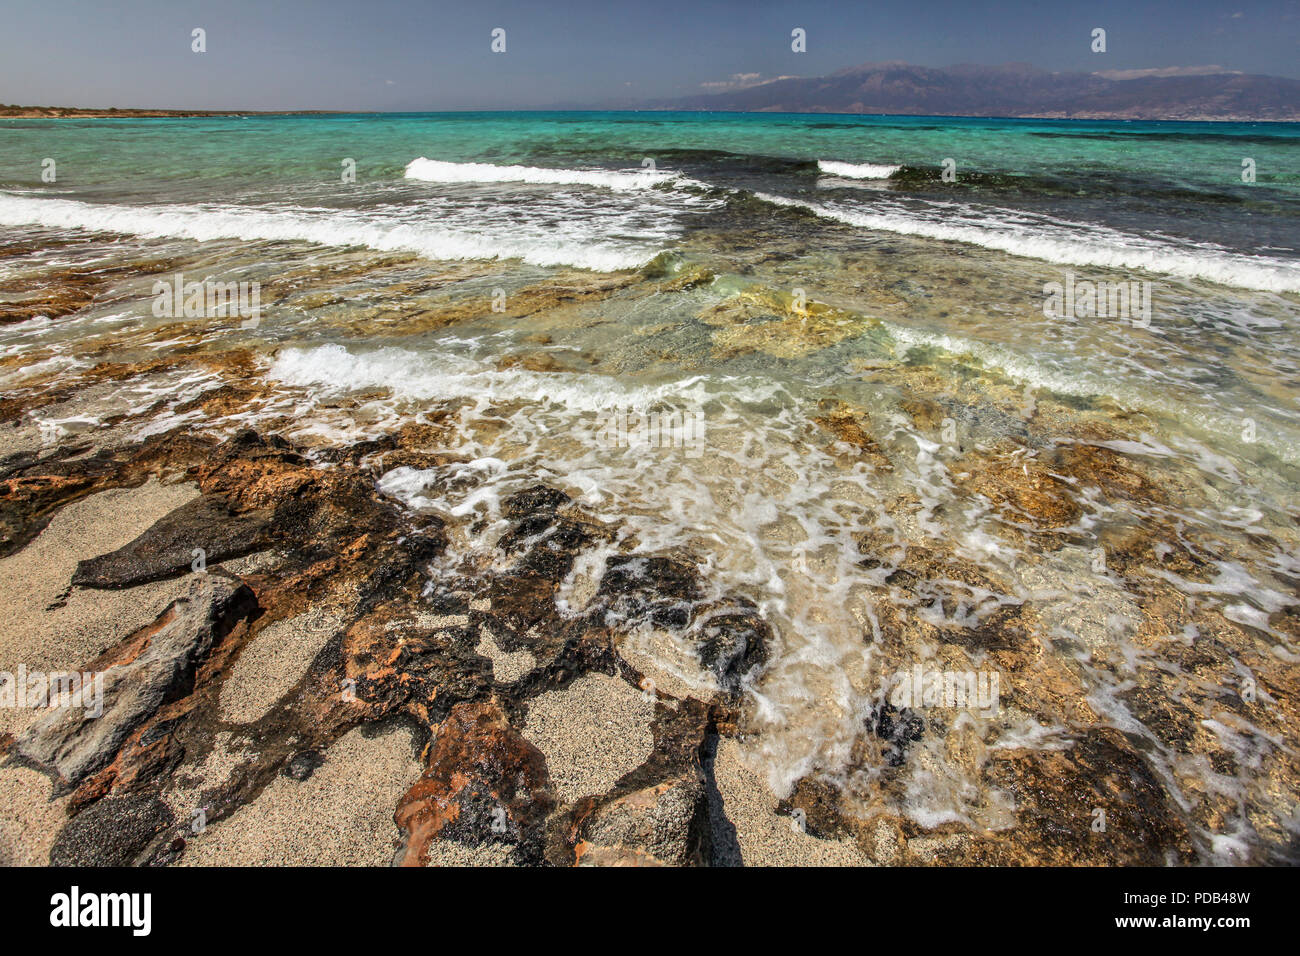 Sand on large rocks, crystal clear turquoise sea with white waves and land in background. Chrissi , Greece Stock Photo